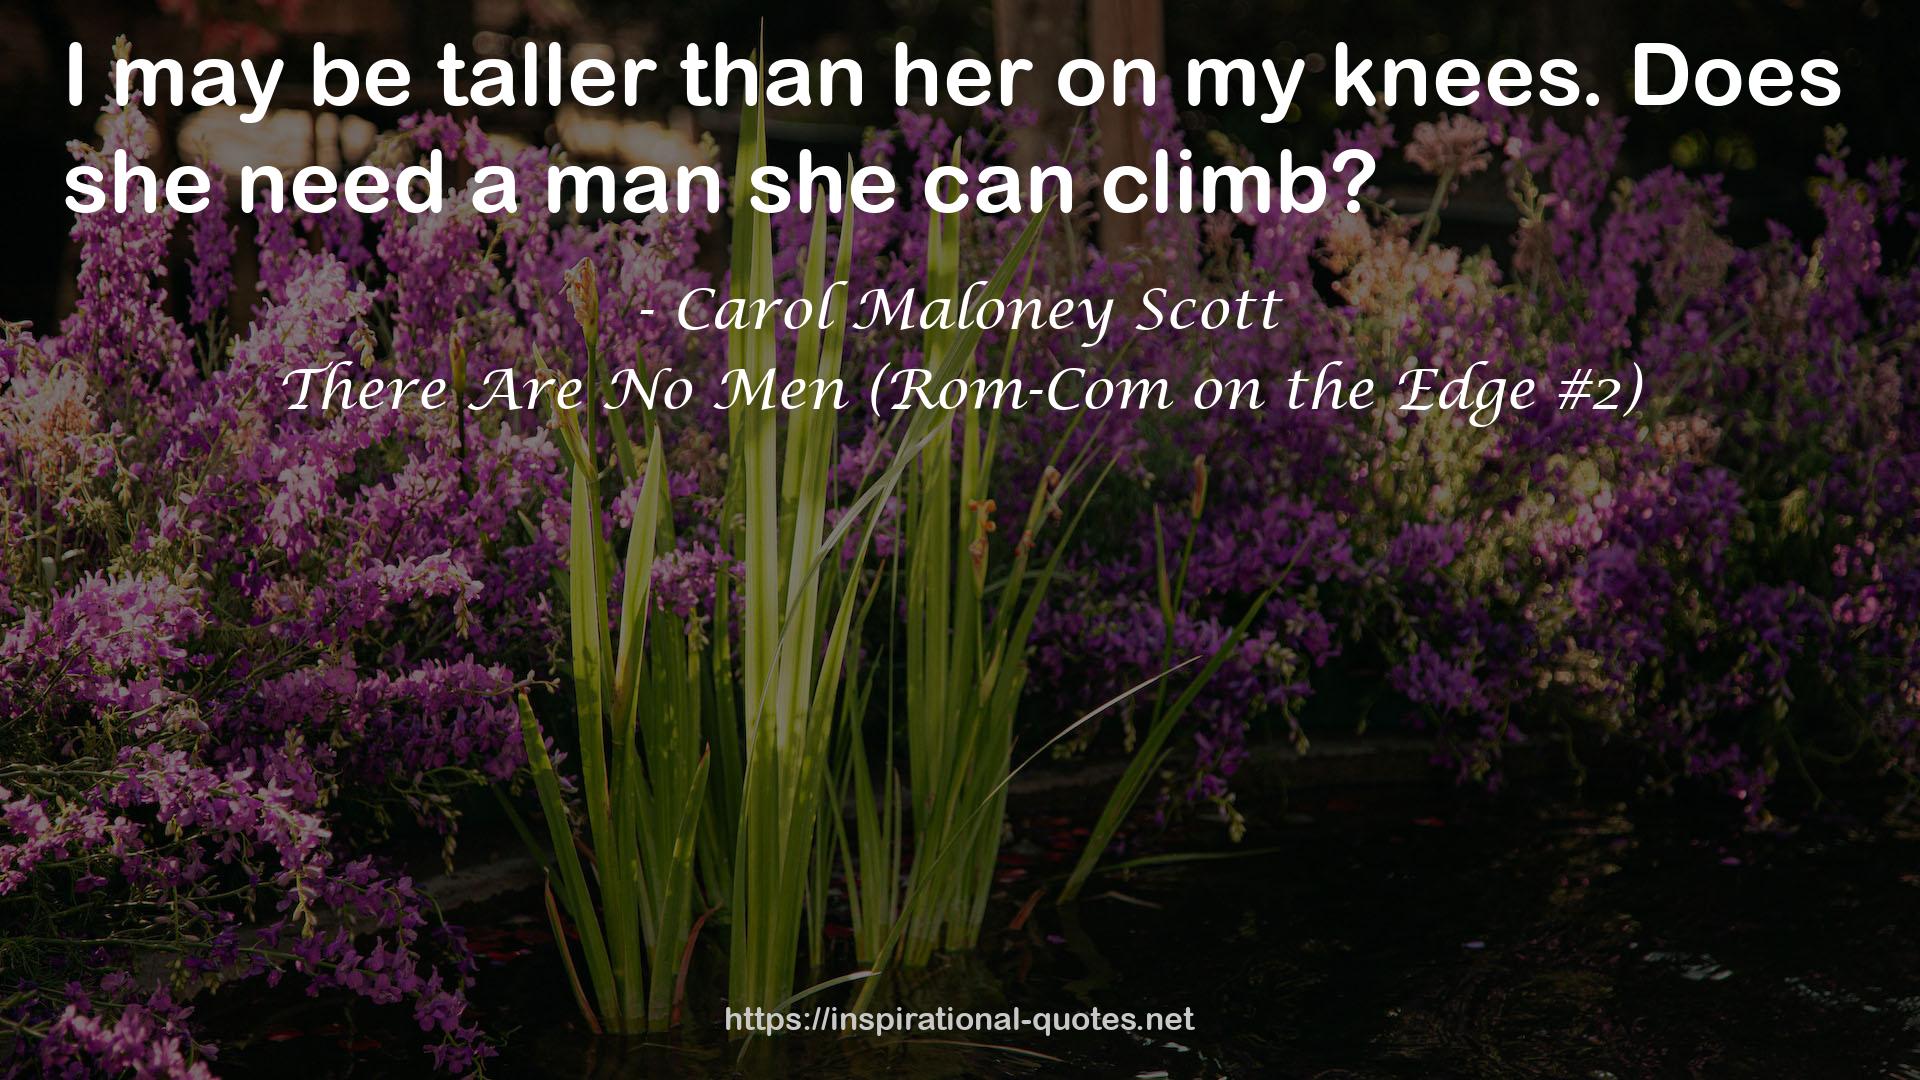 There Are No Men (Rom-Com on the Edge #2) QUOTES